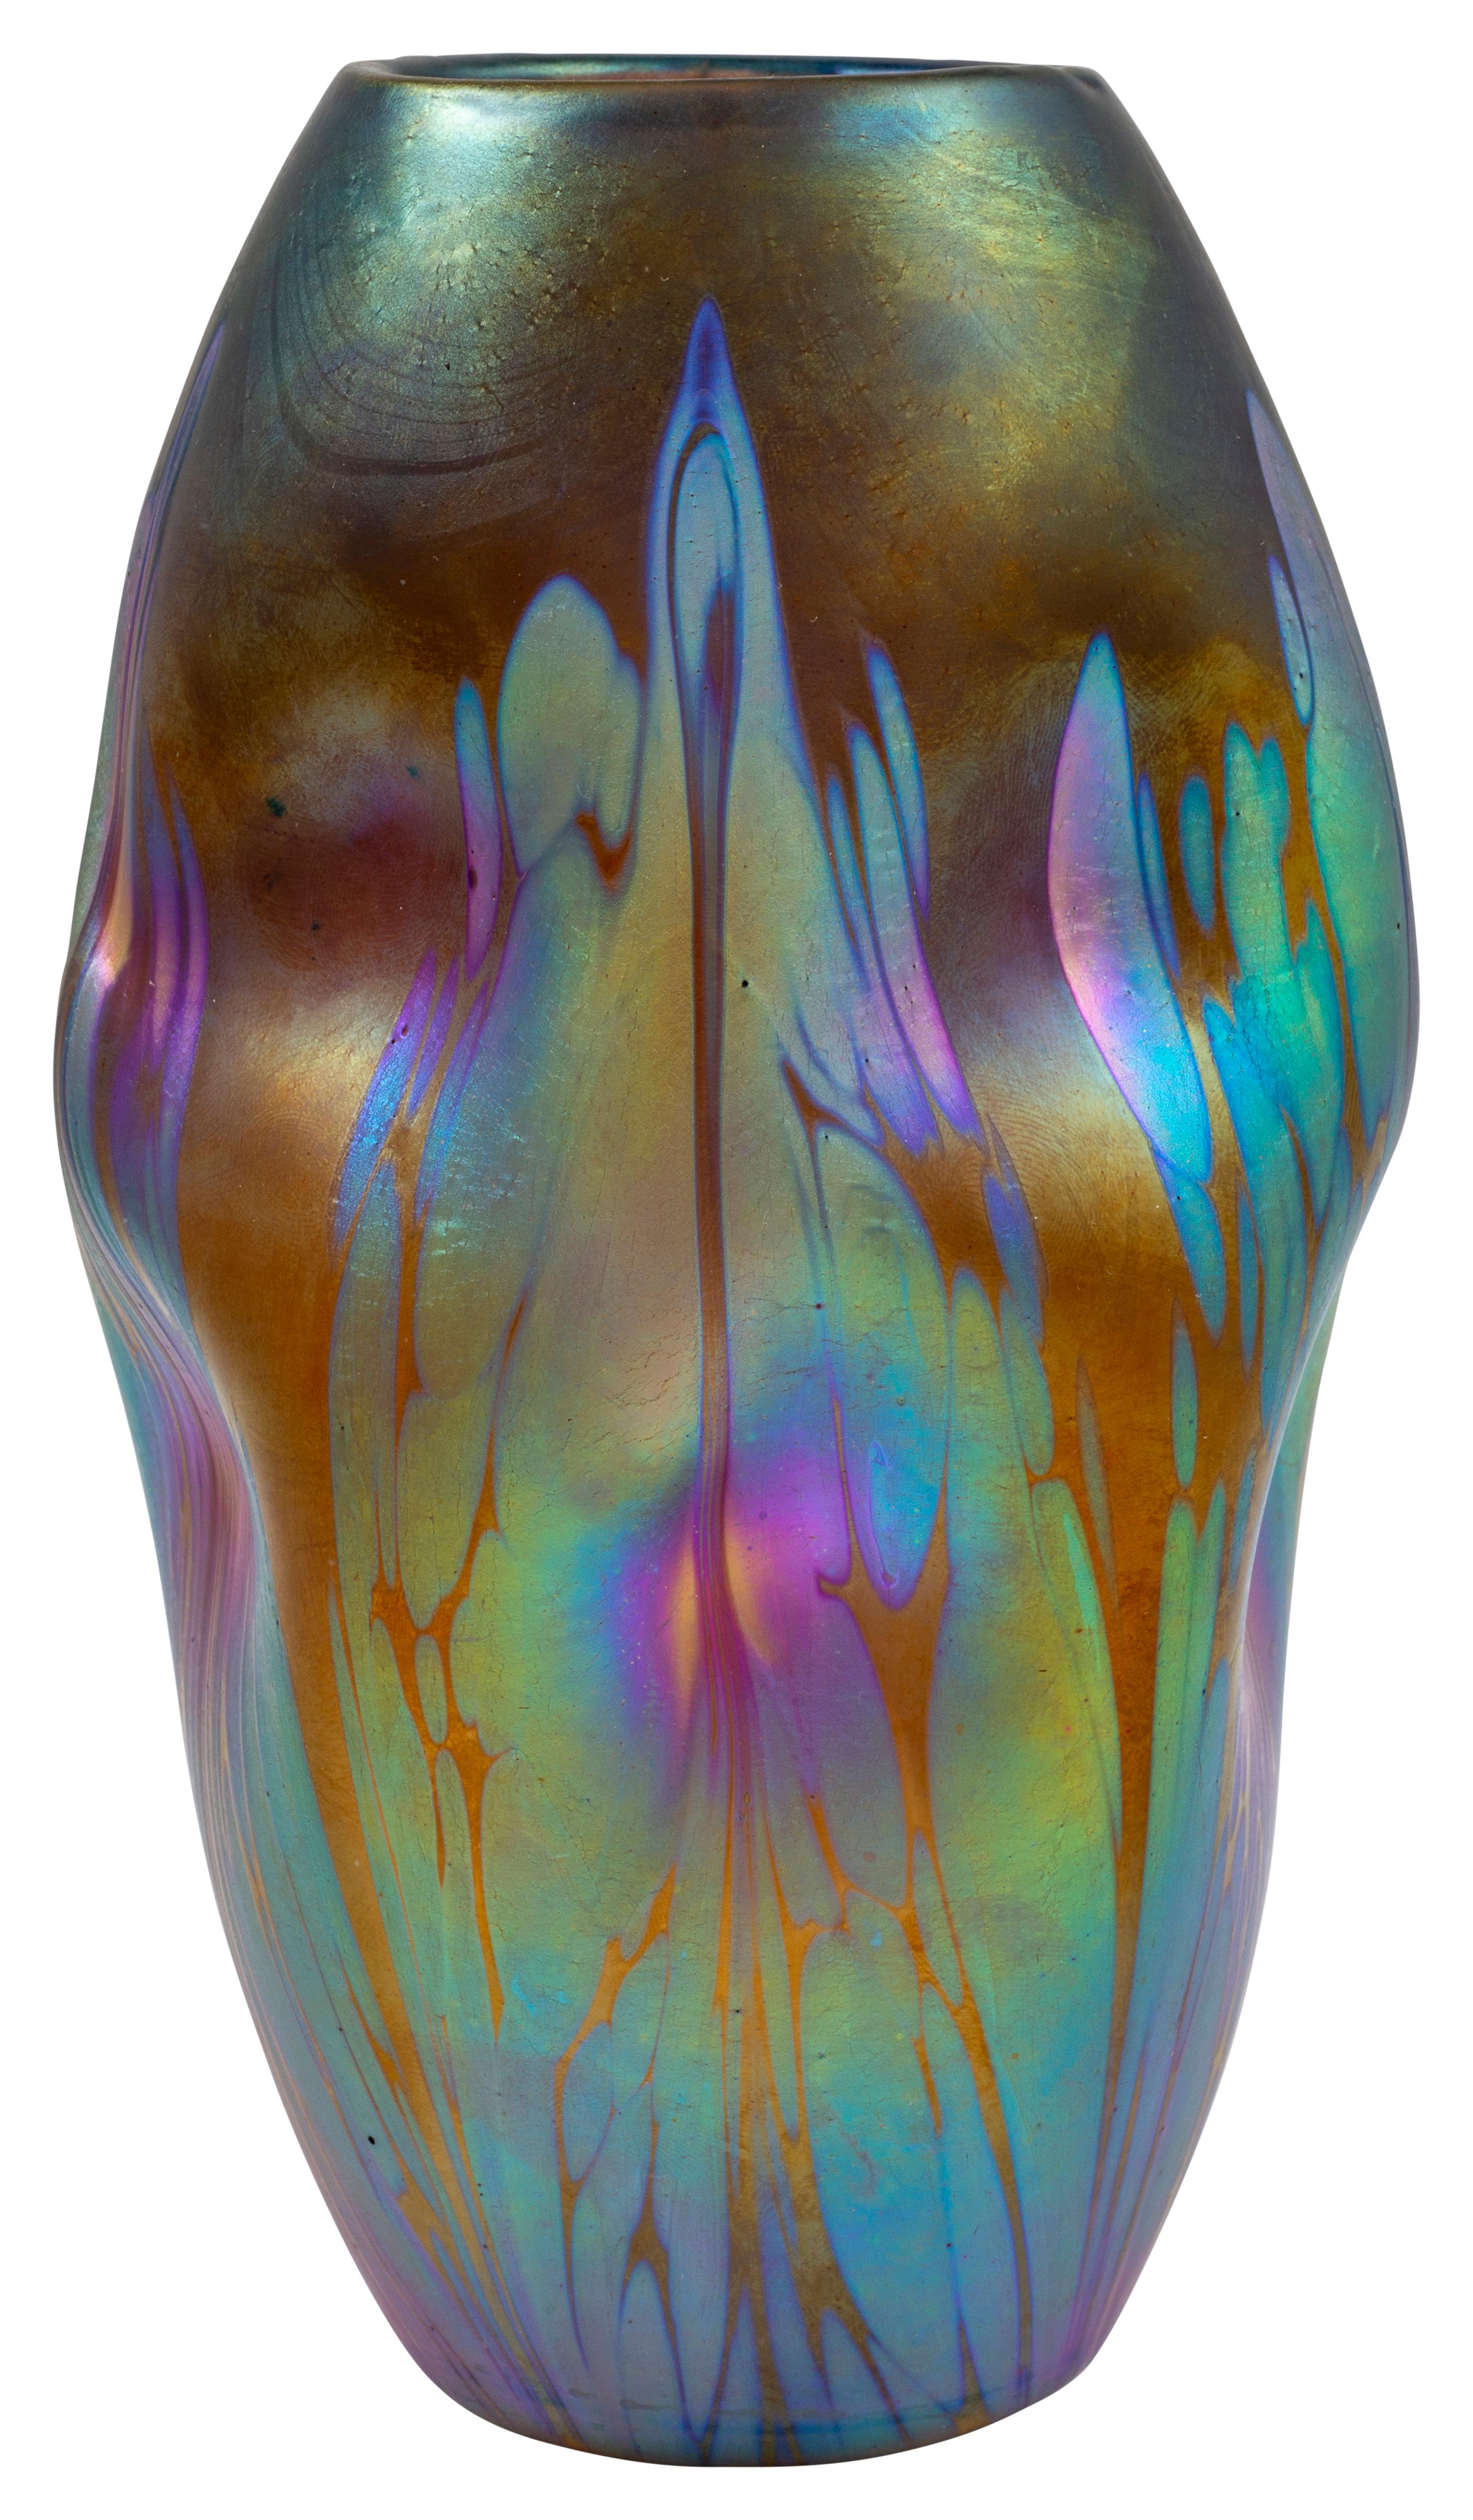 Mouthblown Glass Vase Austrian Jugendstil Brown circa 1901 Johann Loetz-Witwe Decor Medici Maron Phen Gre 2/484 

In 1900, the company Johann Loetz-Witwe Klostermühle made its international breakthrough at the world exhibition in Paris with its